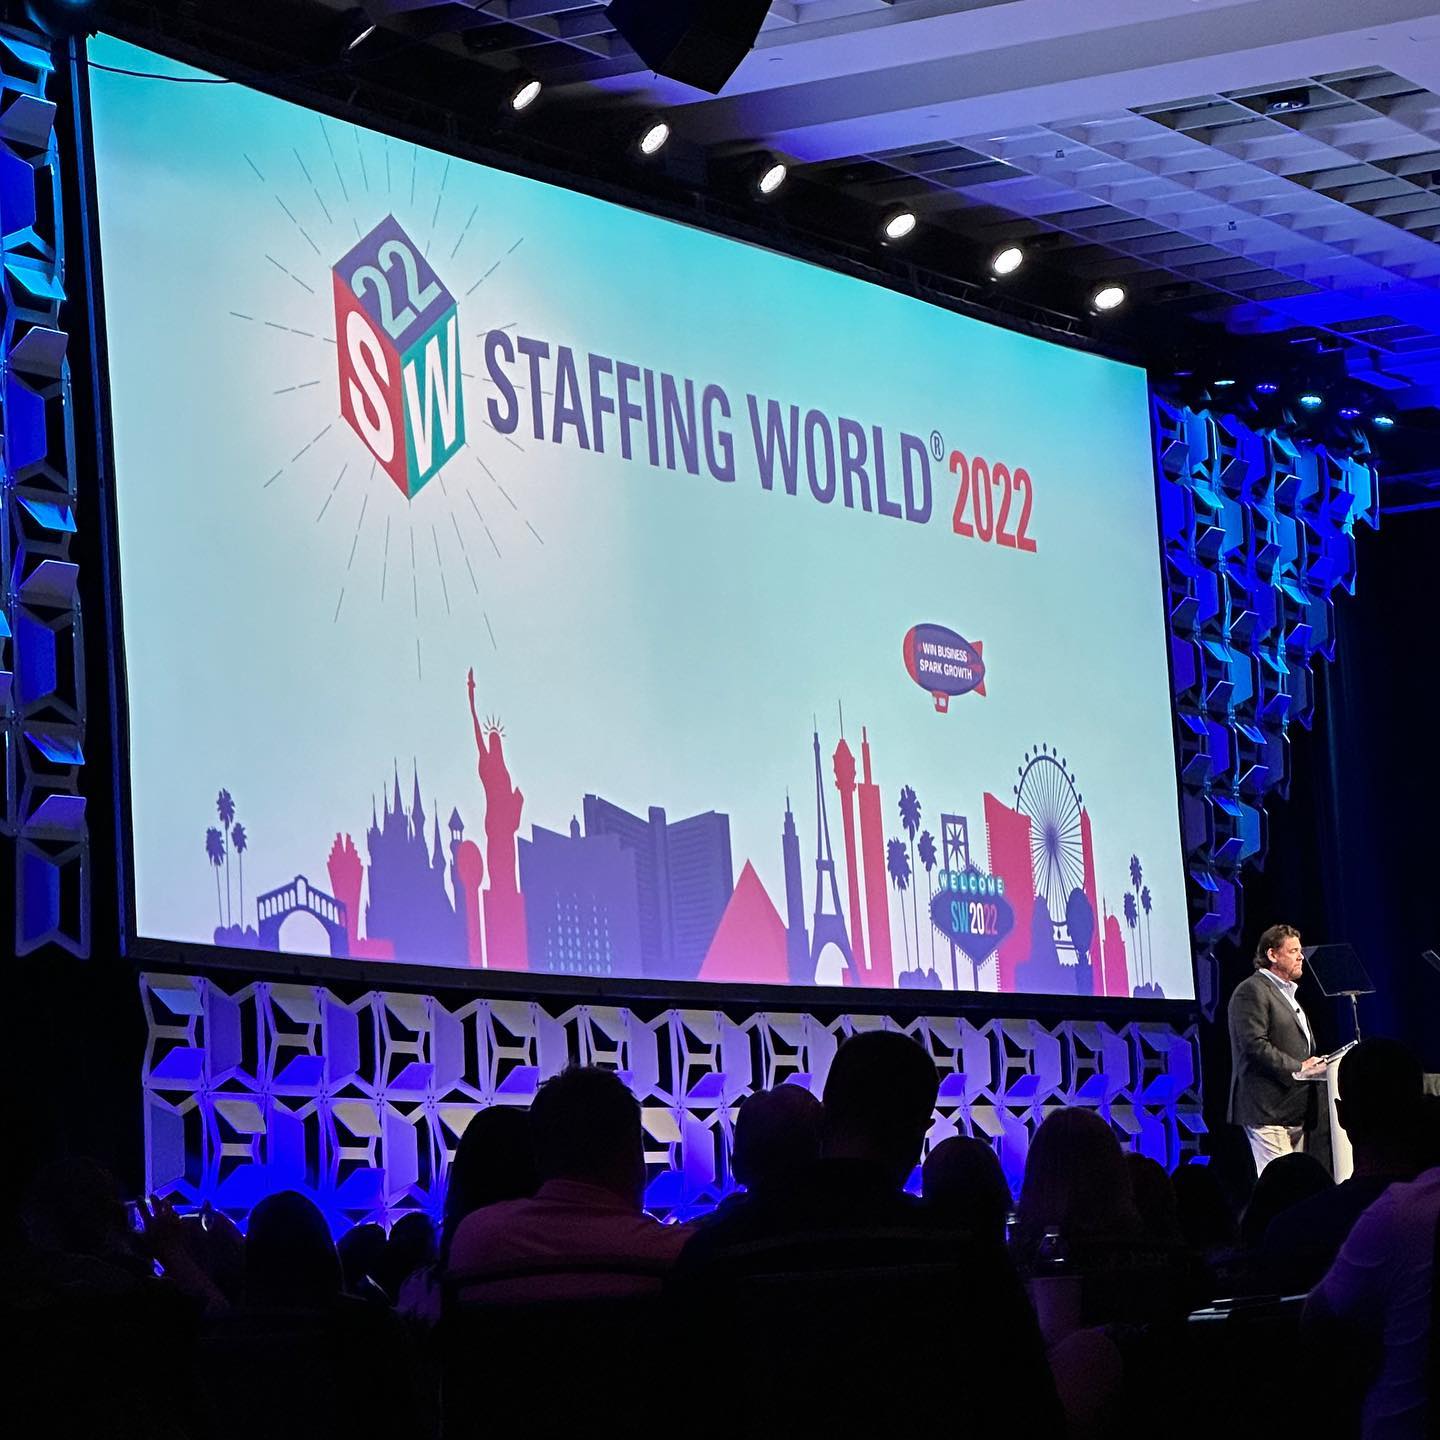 Ardent Staffing is thrilled to be attending Staffing World 2022. It’s